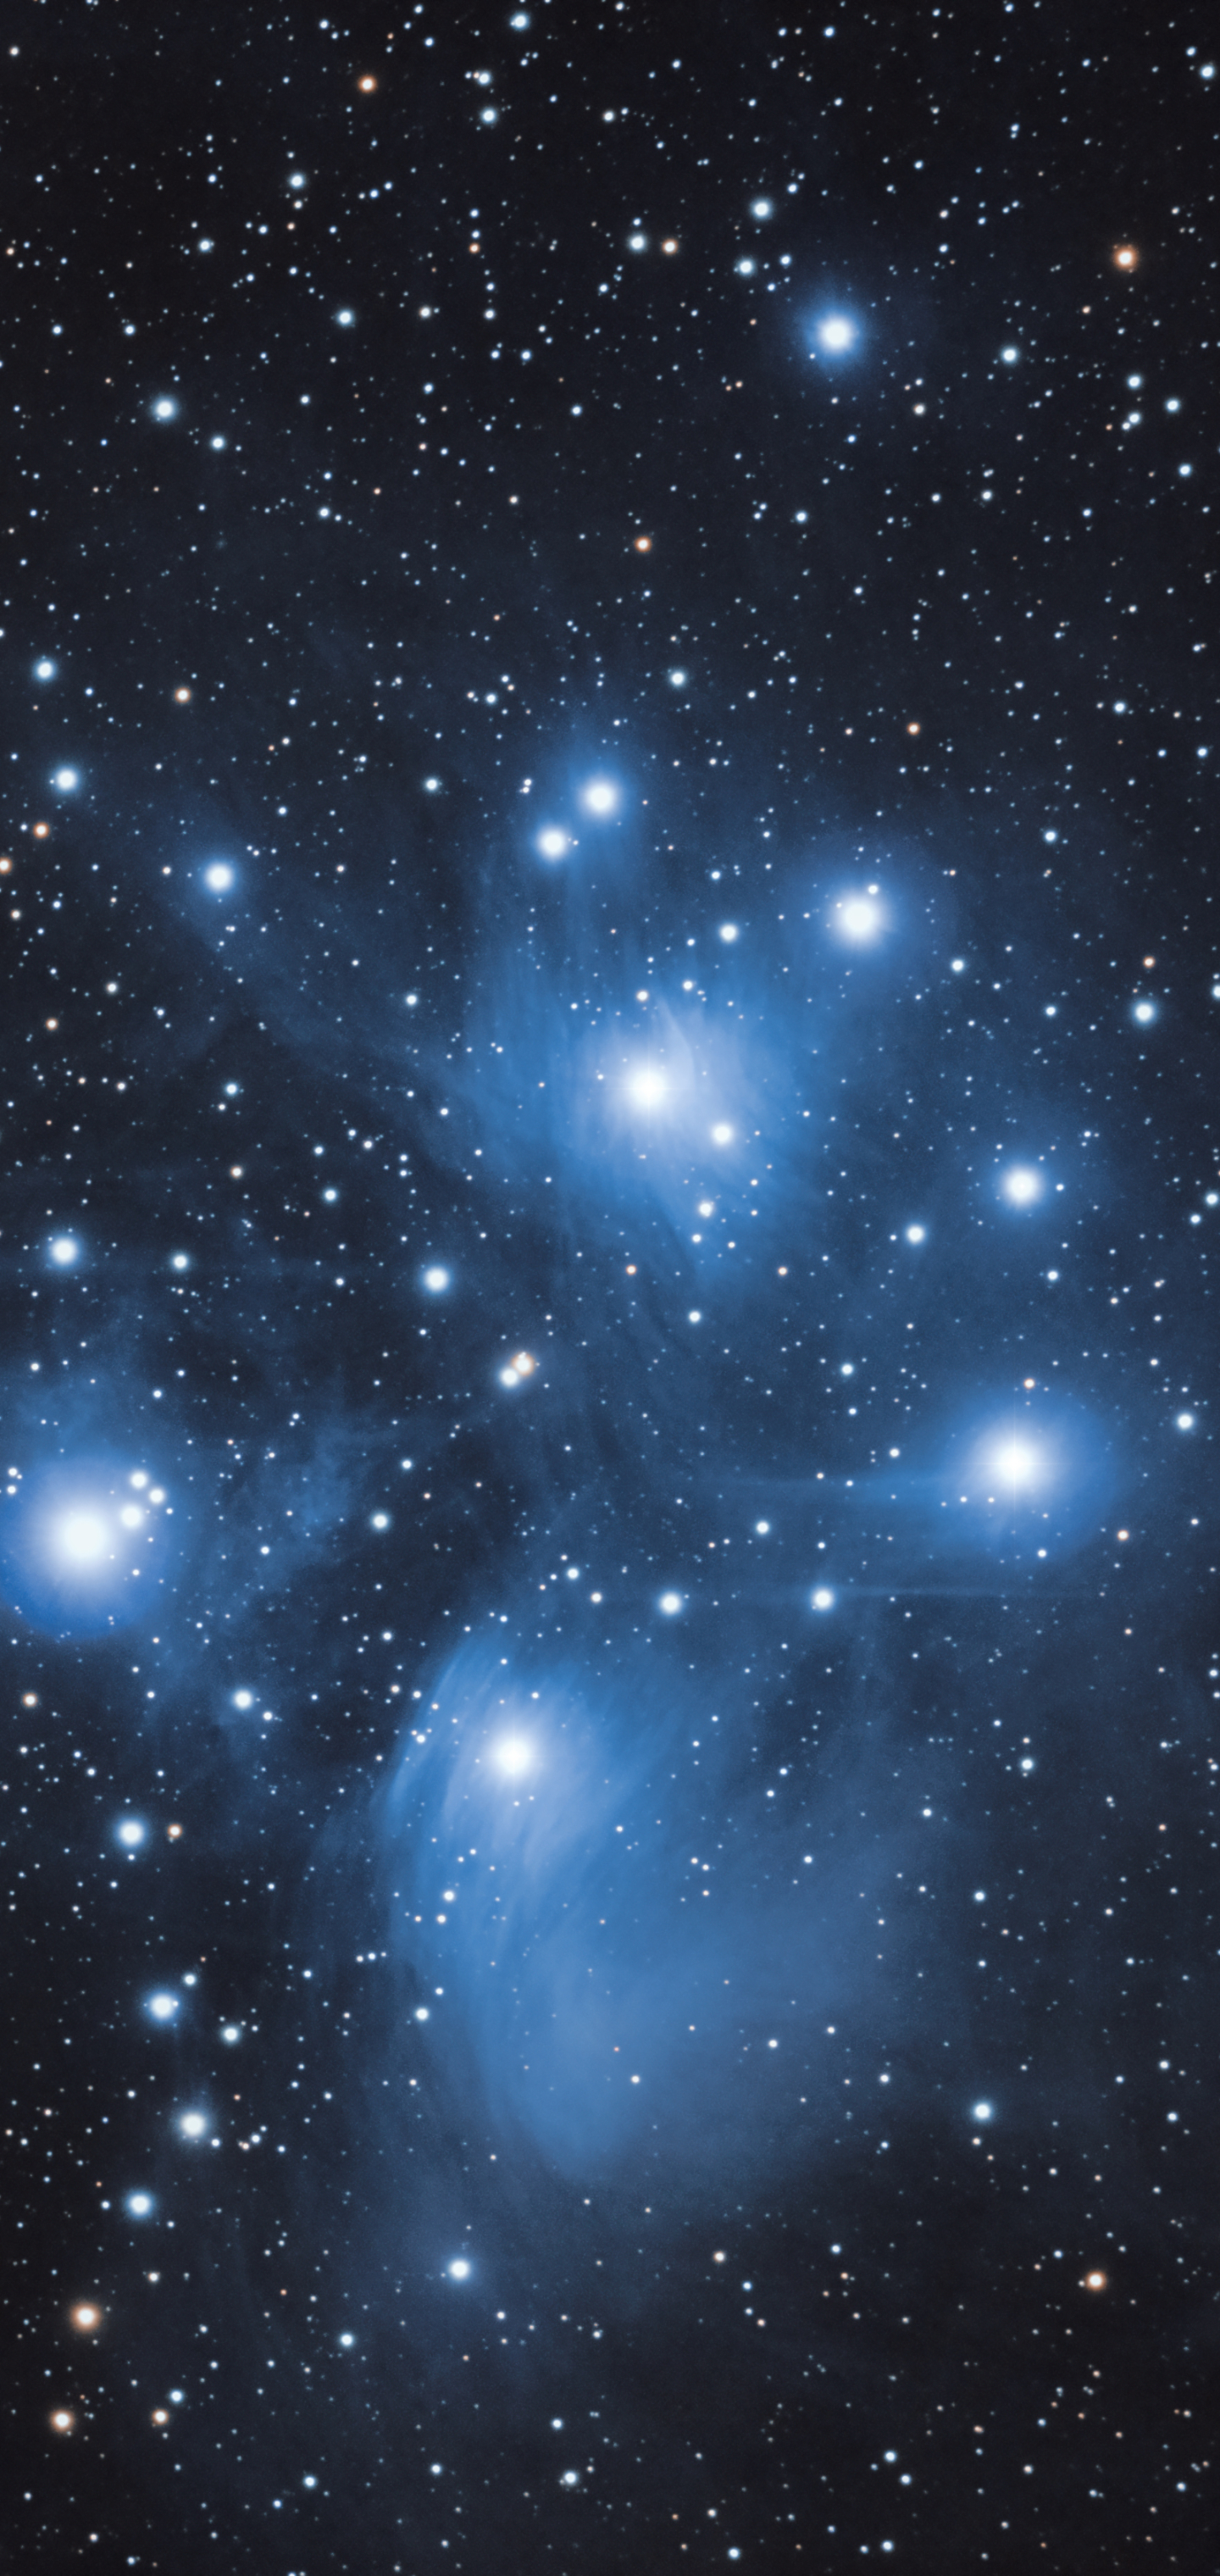 A cluster of stars with a dust cloud in the foreground. - Constellation